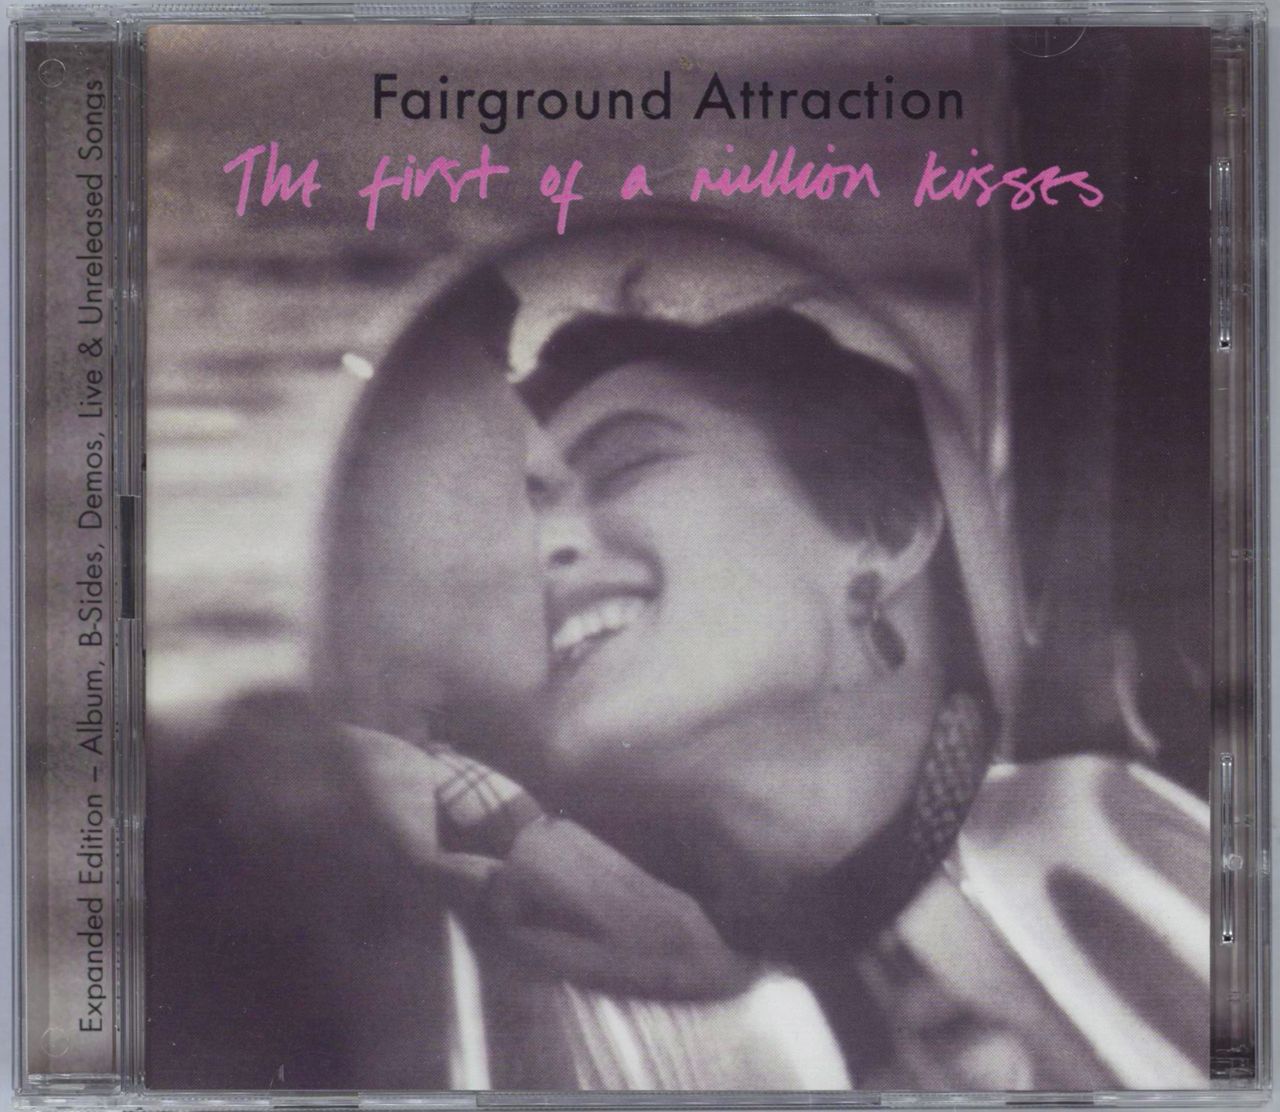 Fairground Attraction The First Of A Million Kisses UK 2 CD album set (Double CD) CDBRED698